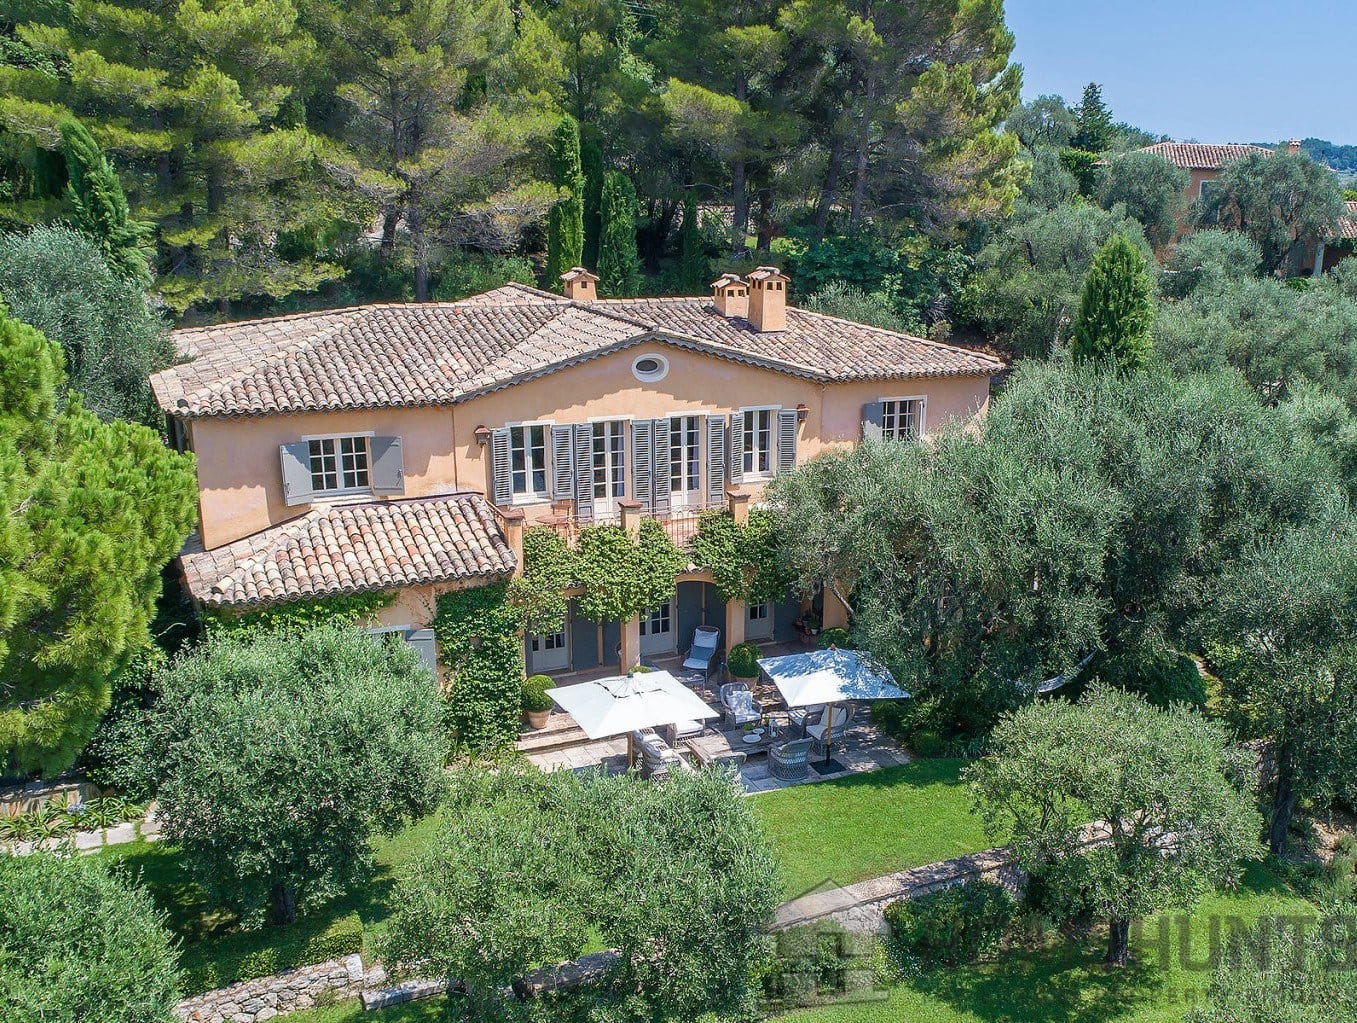 12 Bedroom Castle/Estates in Chateauneuf Grasse 12